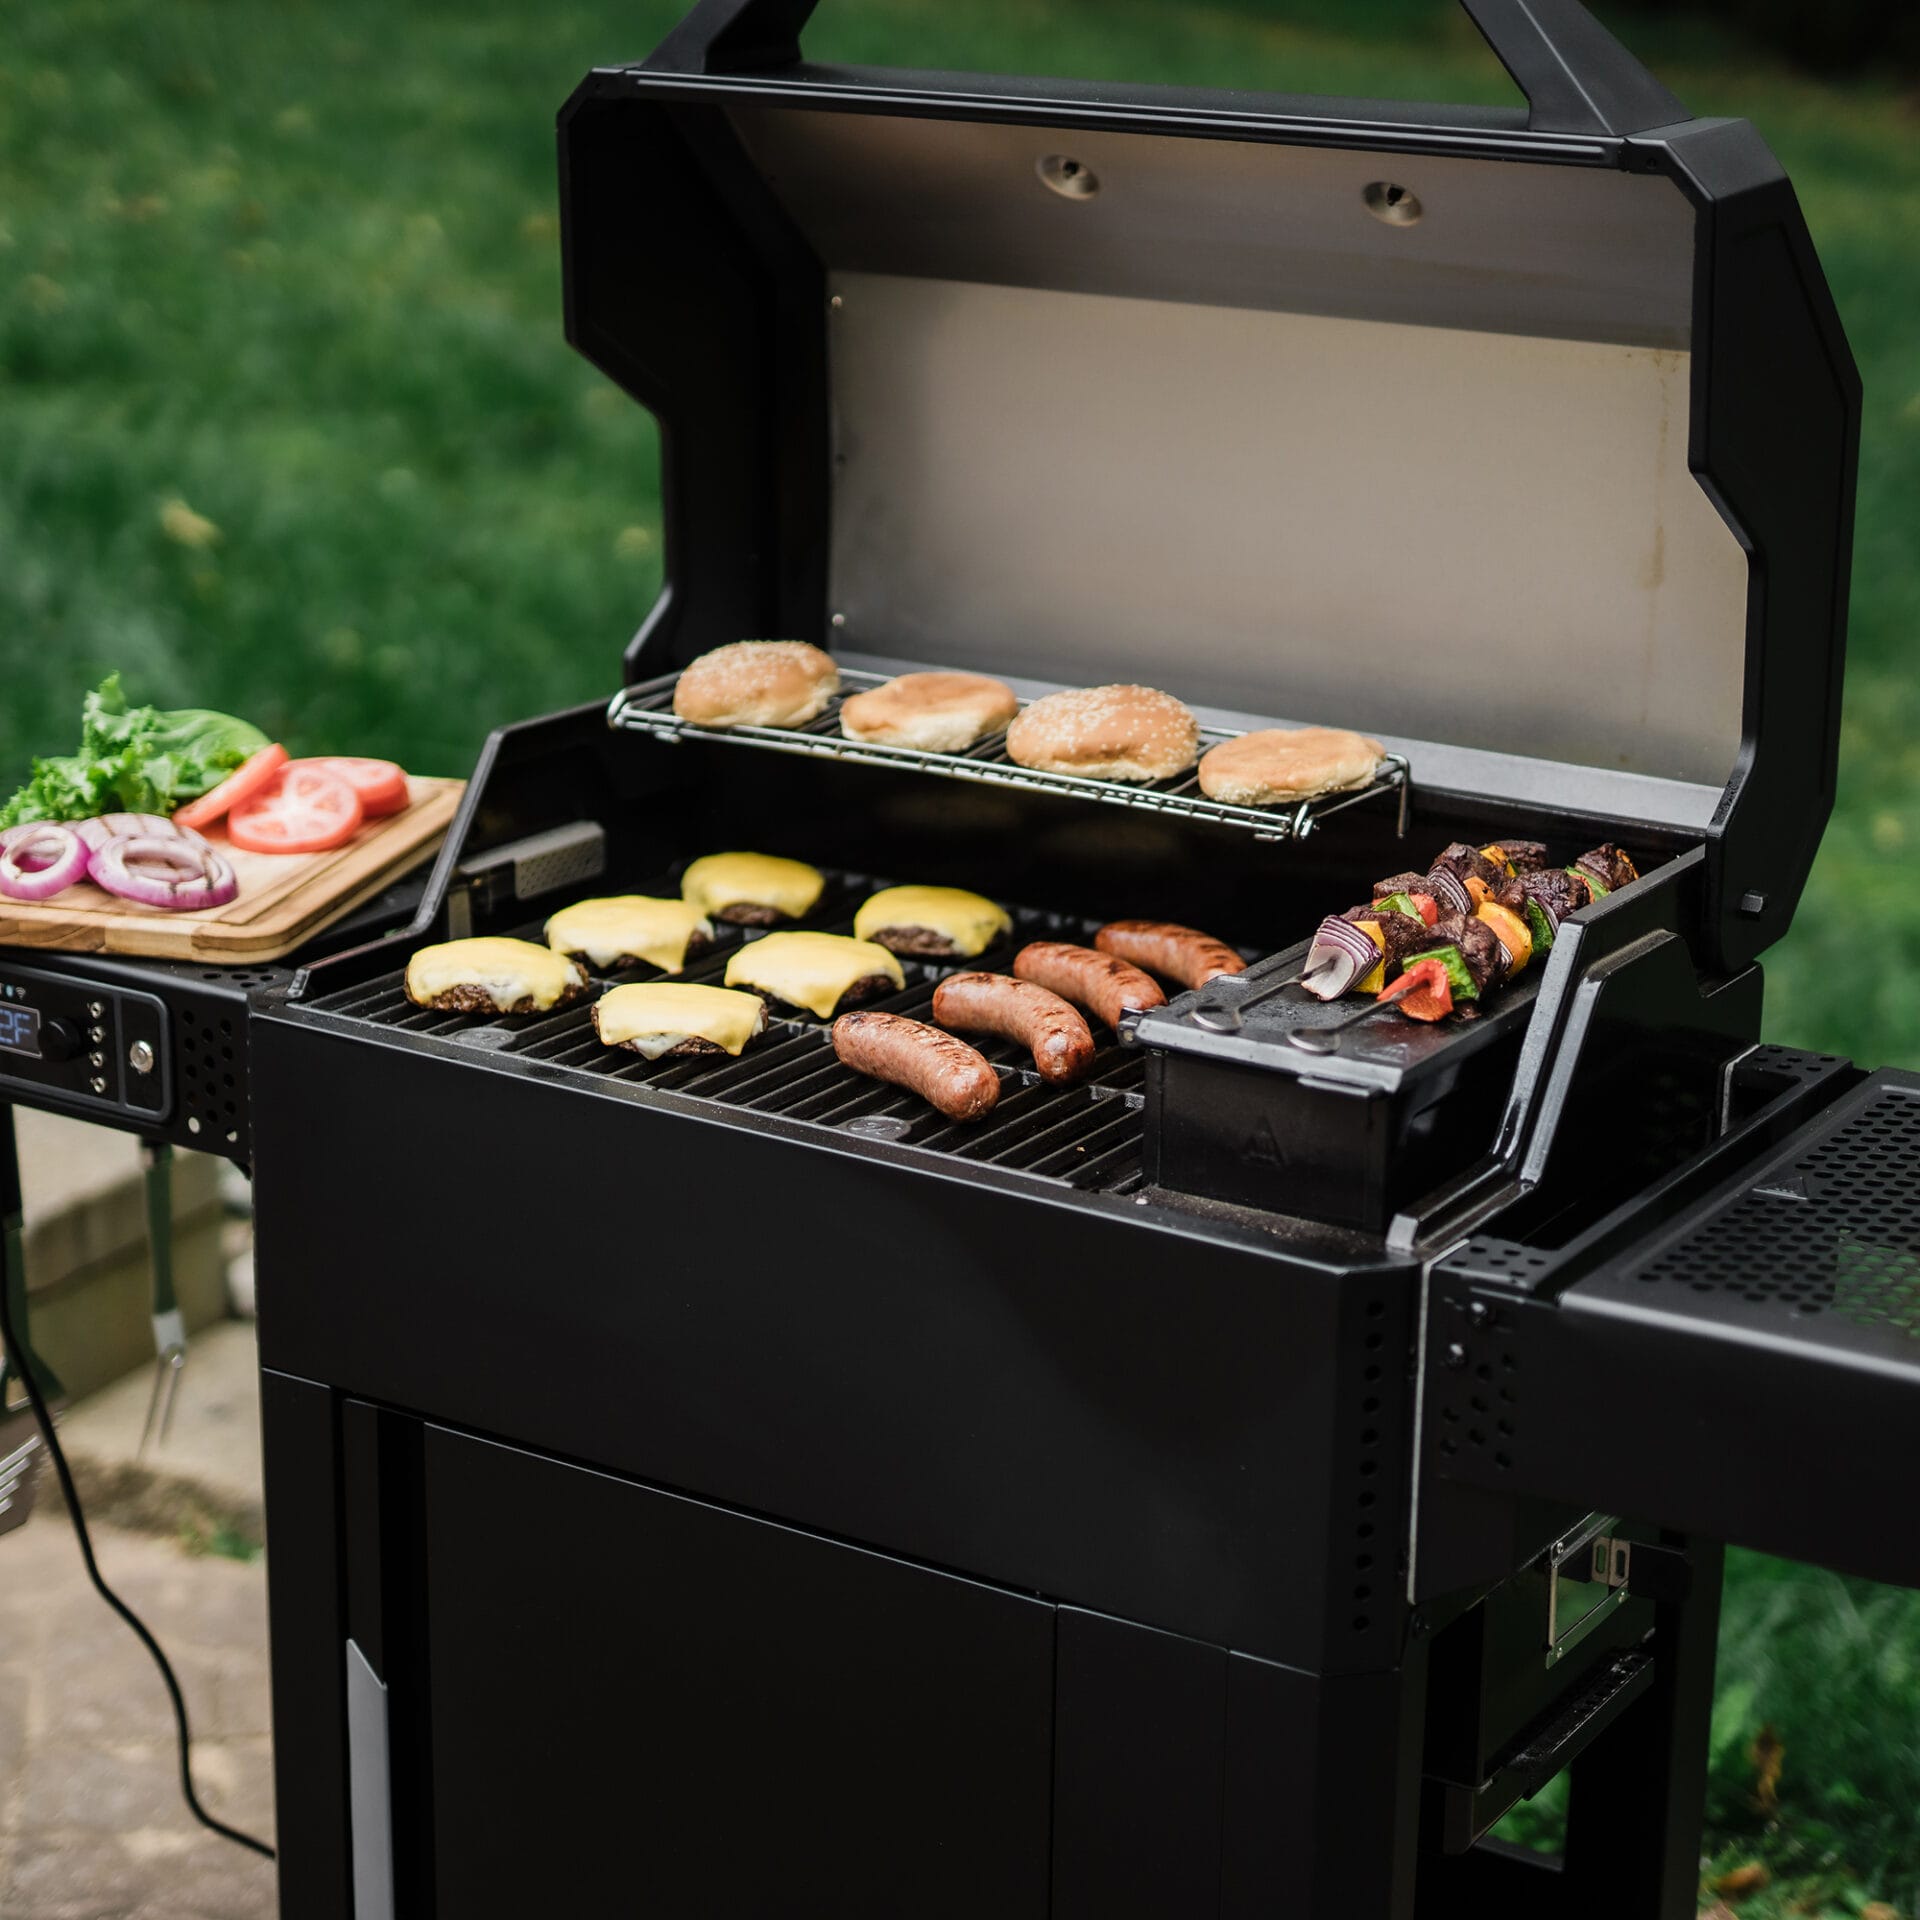 https://www.cookoutnews.com/wp-content/uploads/2023/12/Masterbuilt-AutoIgnite-Grill-Loaded-with-Food.jpg